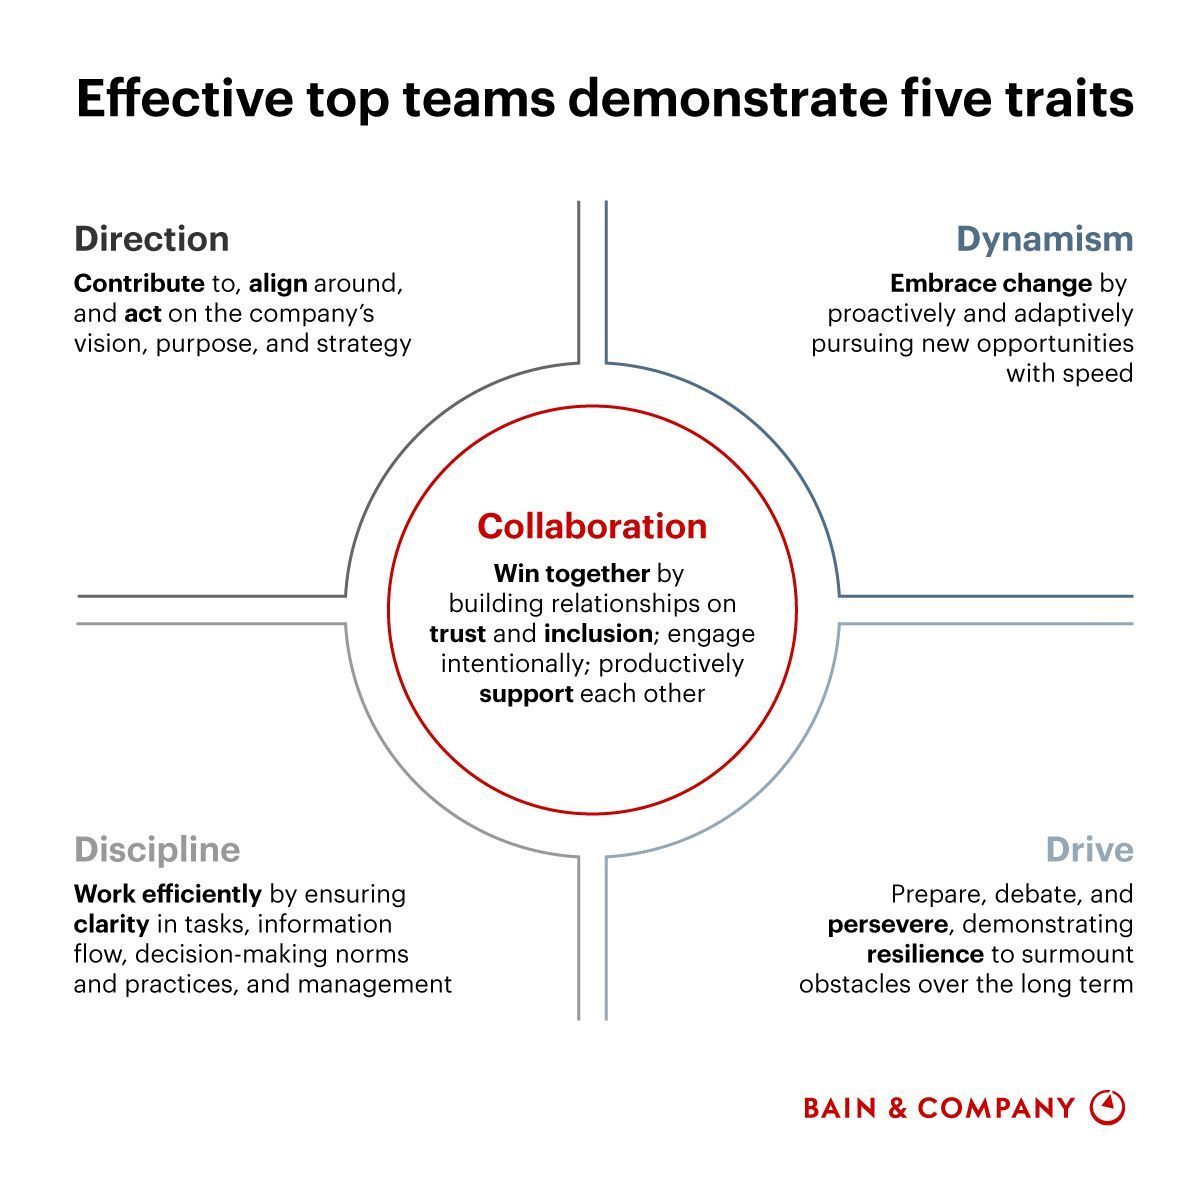 A top team’s ability to act as a collective makes the most significant difference. The most effective teams develop five key behaviors: direction, discipline, collaboration, dynamism, and drive. Source @BainandCompany Link bit.ly/48AWQKc rt @antgrasso